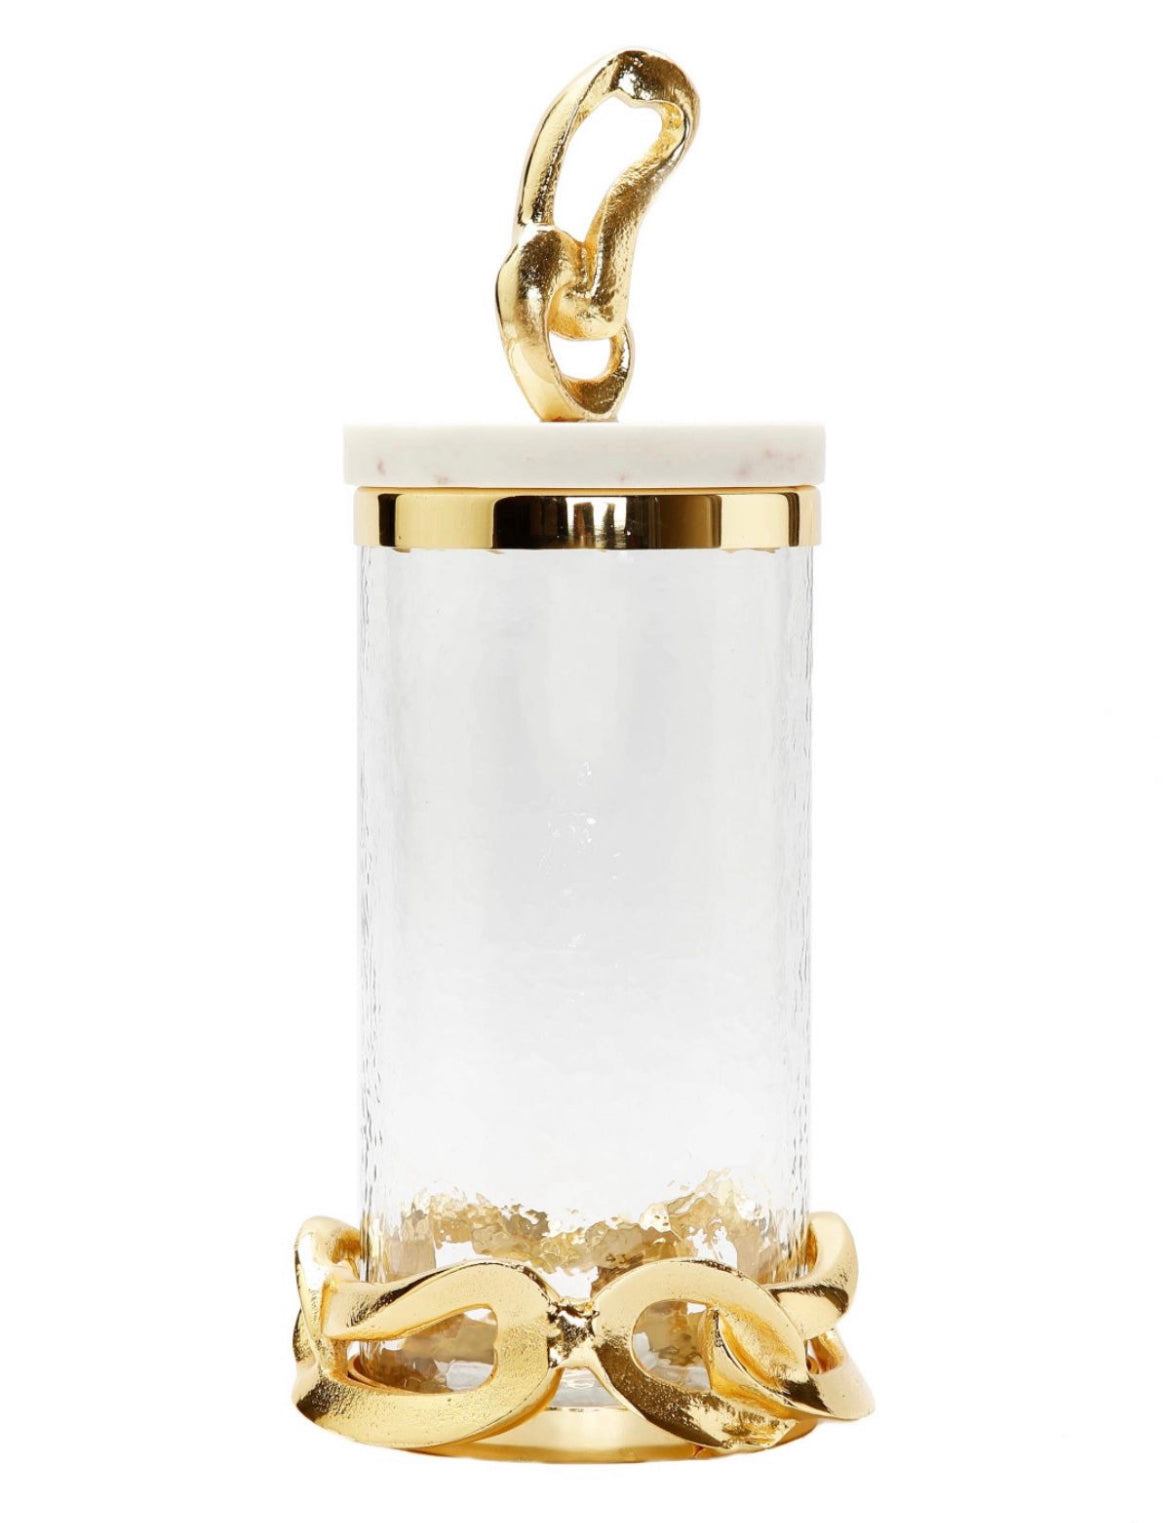 The Catena D’ Oro Glass Canisters has a beautiful gold chain design nestled at the bottom and top with a Marble Lid  available in Size Large from KYA Home Decor